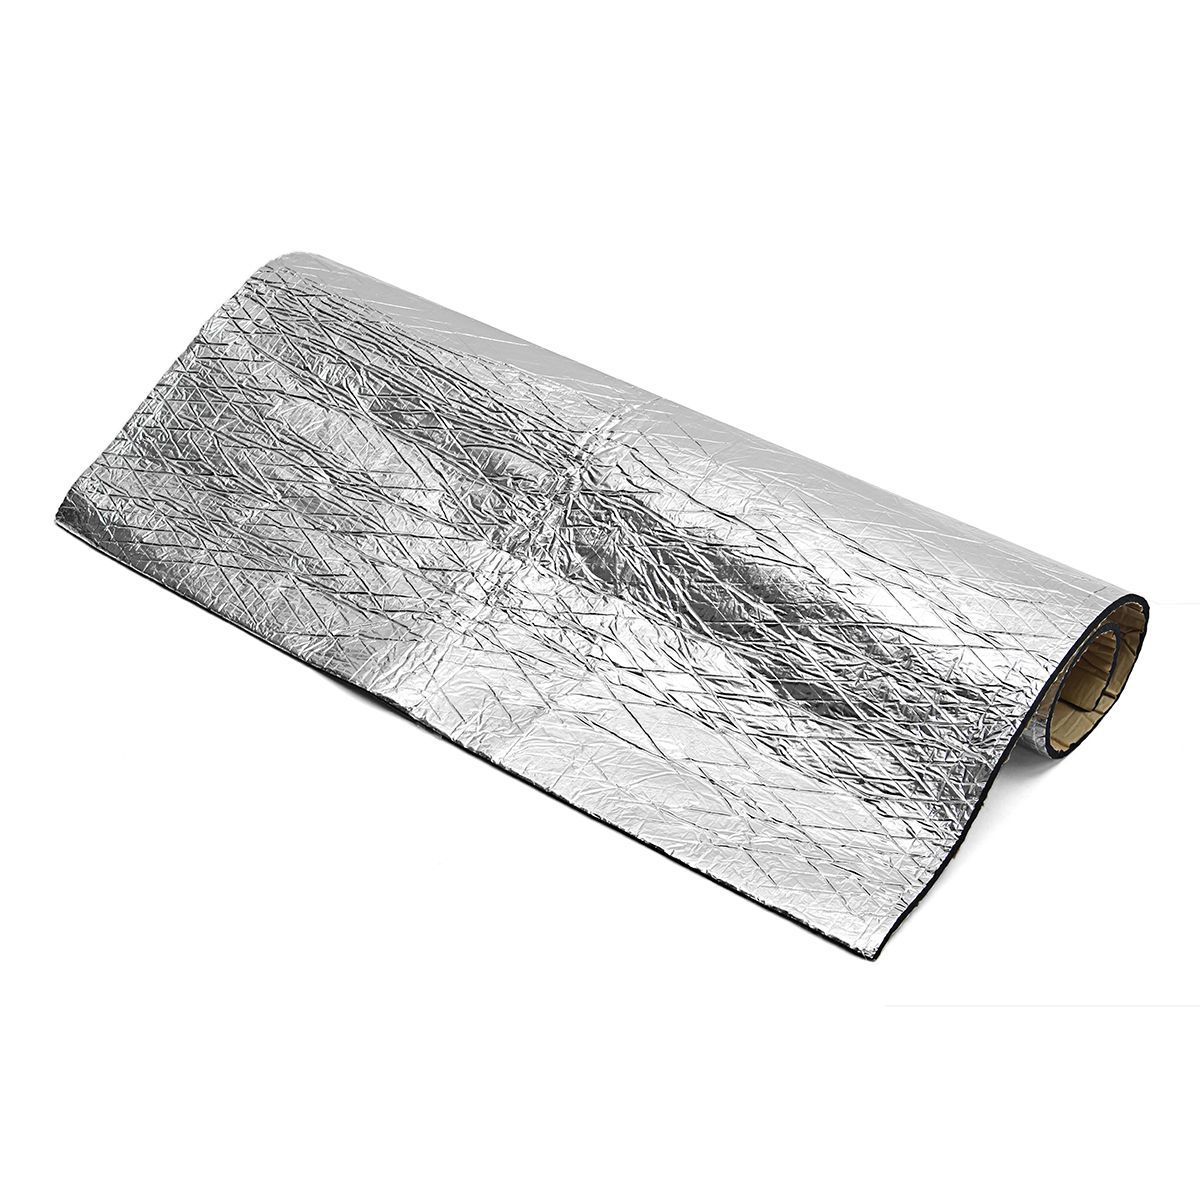 140100100cm-Glass-Fibre-Sound-Proofing-Deadening-Insulation-7mm-Closed-Cell-Foam-1254257